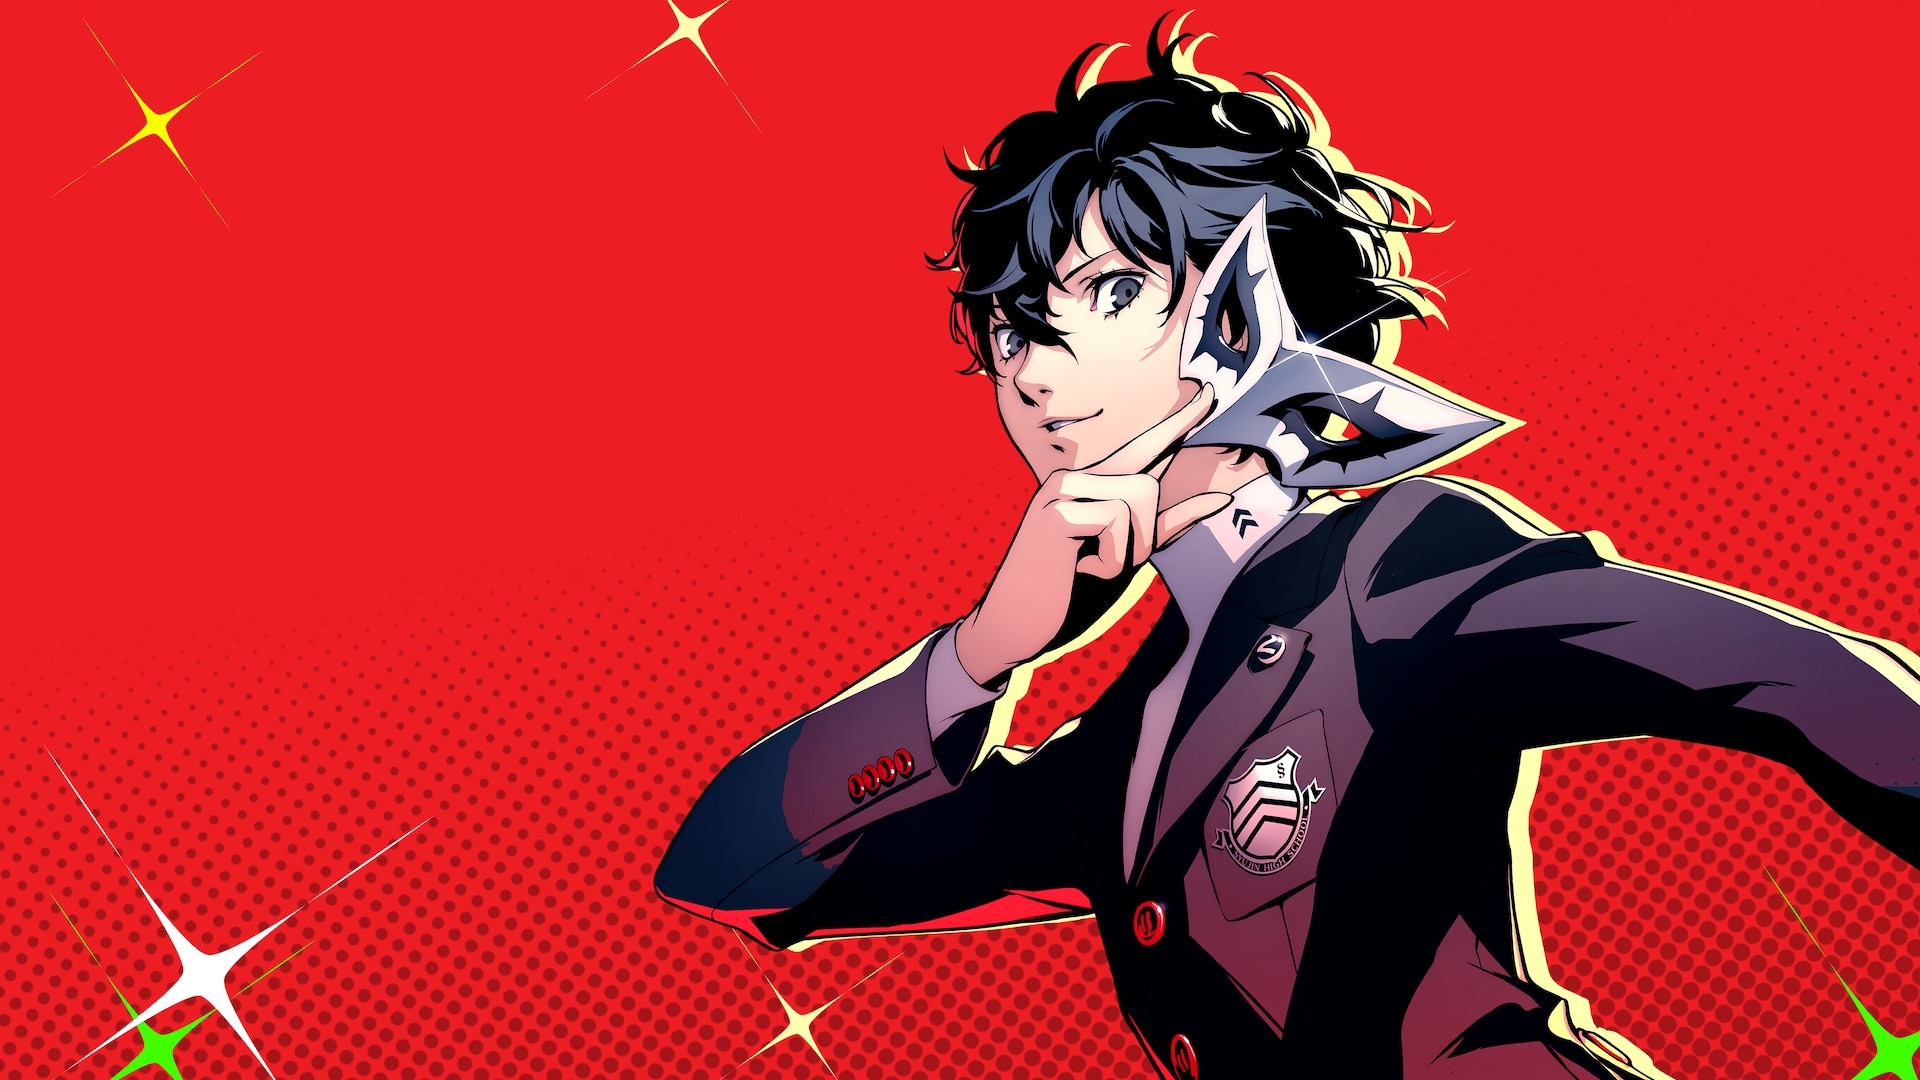 Persona 5 Royal Game Wallpaper Hd Games 4k Wallpapers Images Photos And Background Wallpapers Den